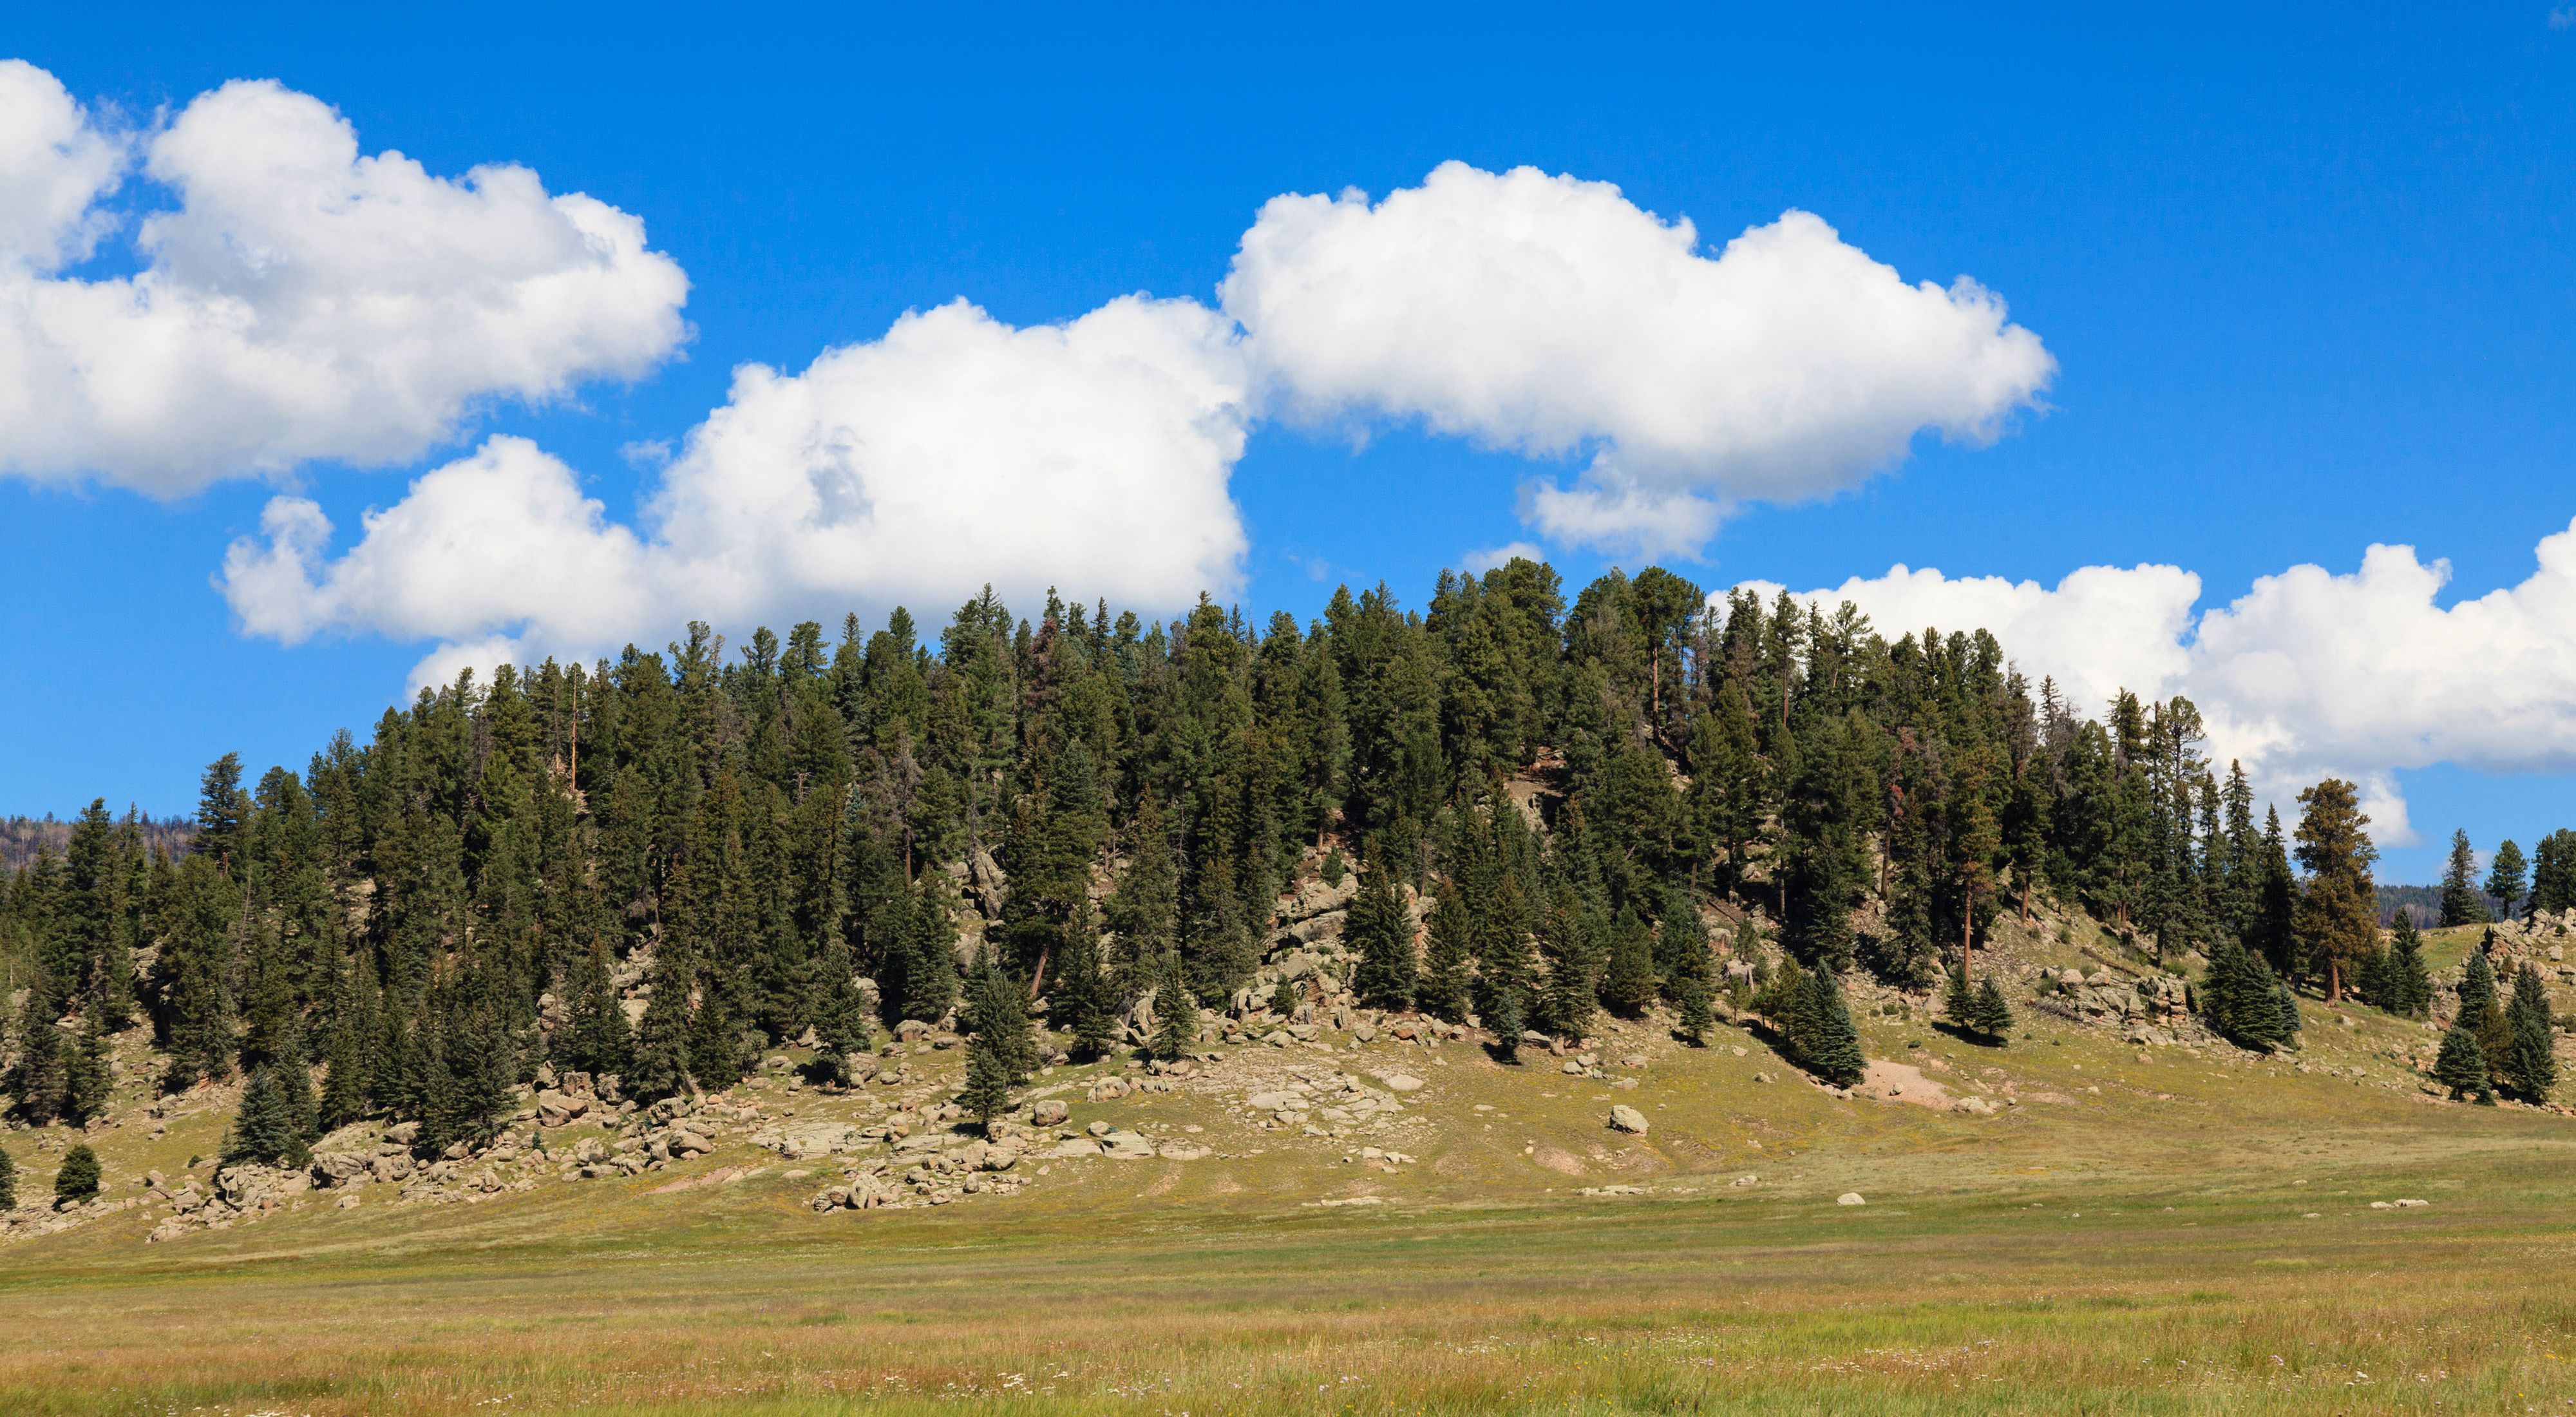 Hillock at Valles Caldera National Preserve. The Rio Grande Water Fund will generate sustainable funding for a 10-30 year program of large-scale forest and watershed restoration treatments.